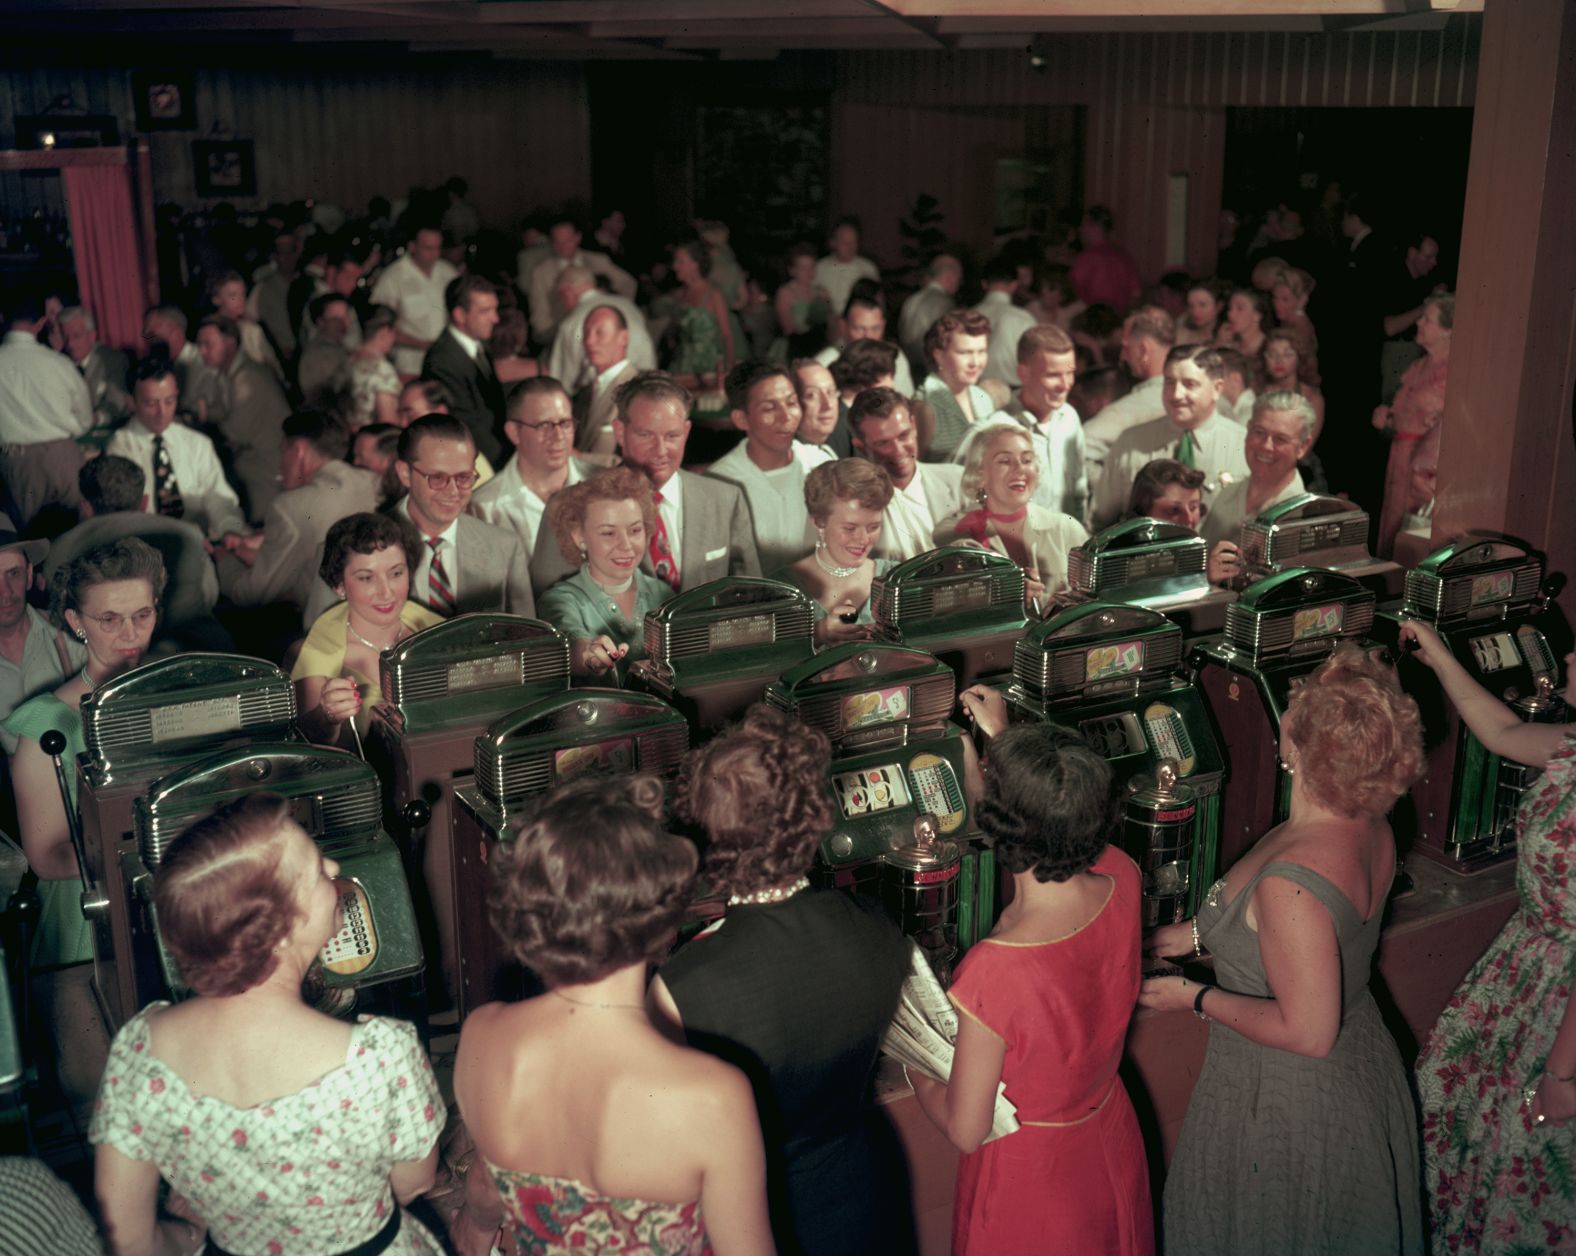 Women play slot machines in a crowded room at the Desert Inn casino in 1953.